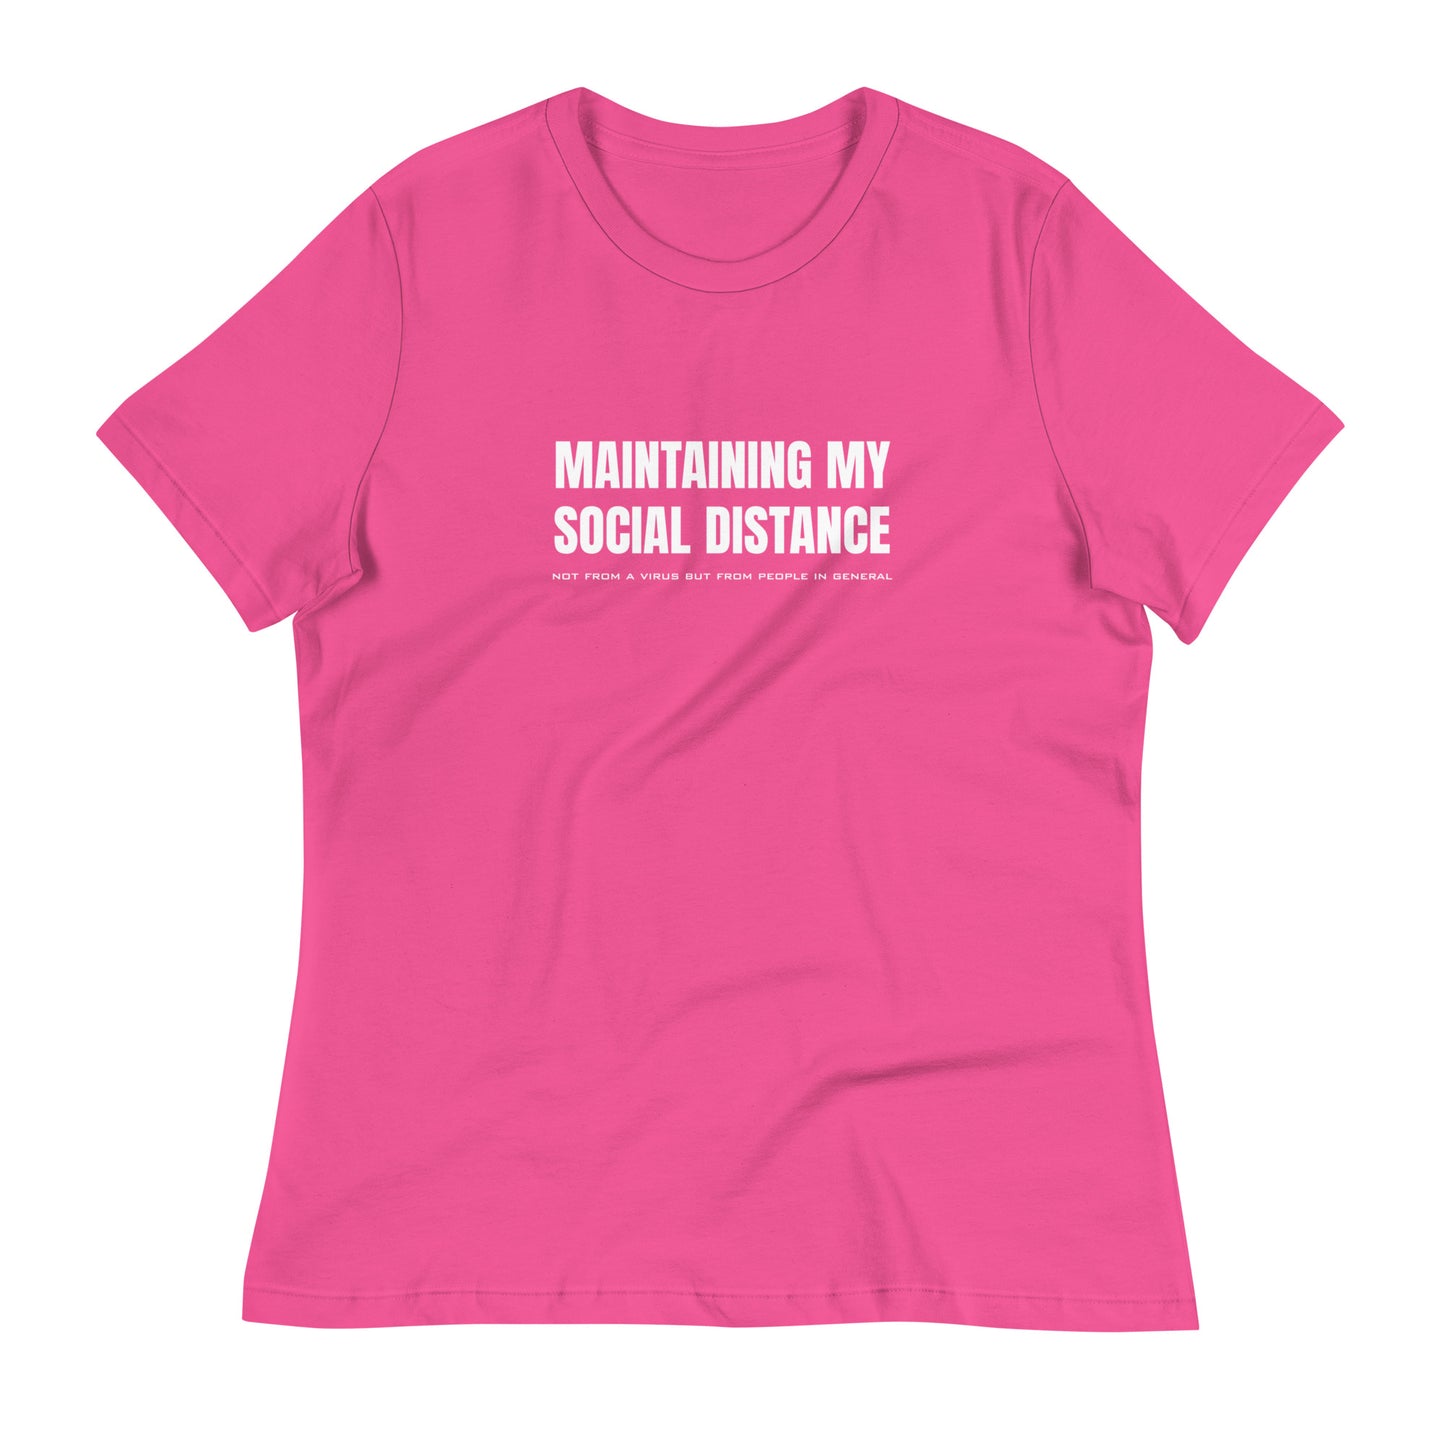 Berry (hot pink) women's relaxed fit t-shirt with white graphic: "MAINTAINING MY SOCIAL DISTANCE not from a virus but from people in general"